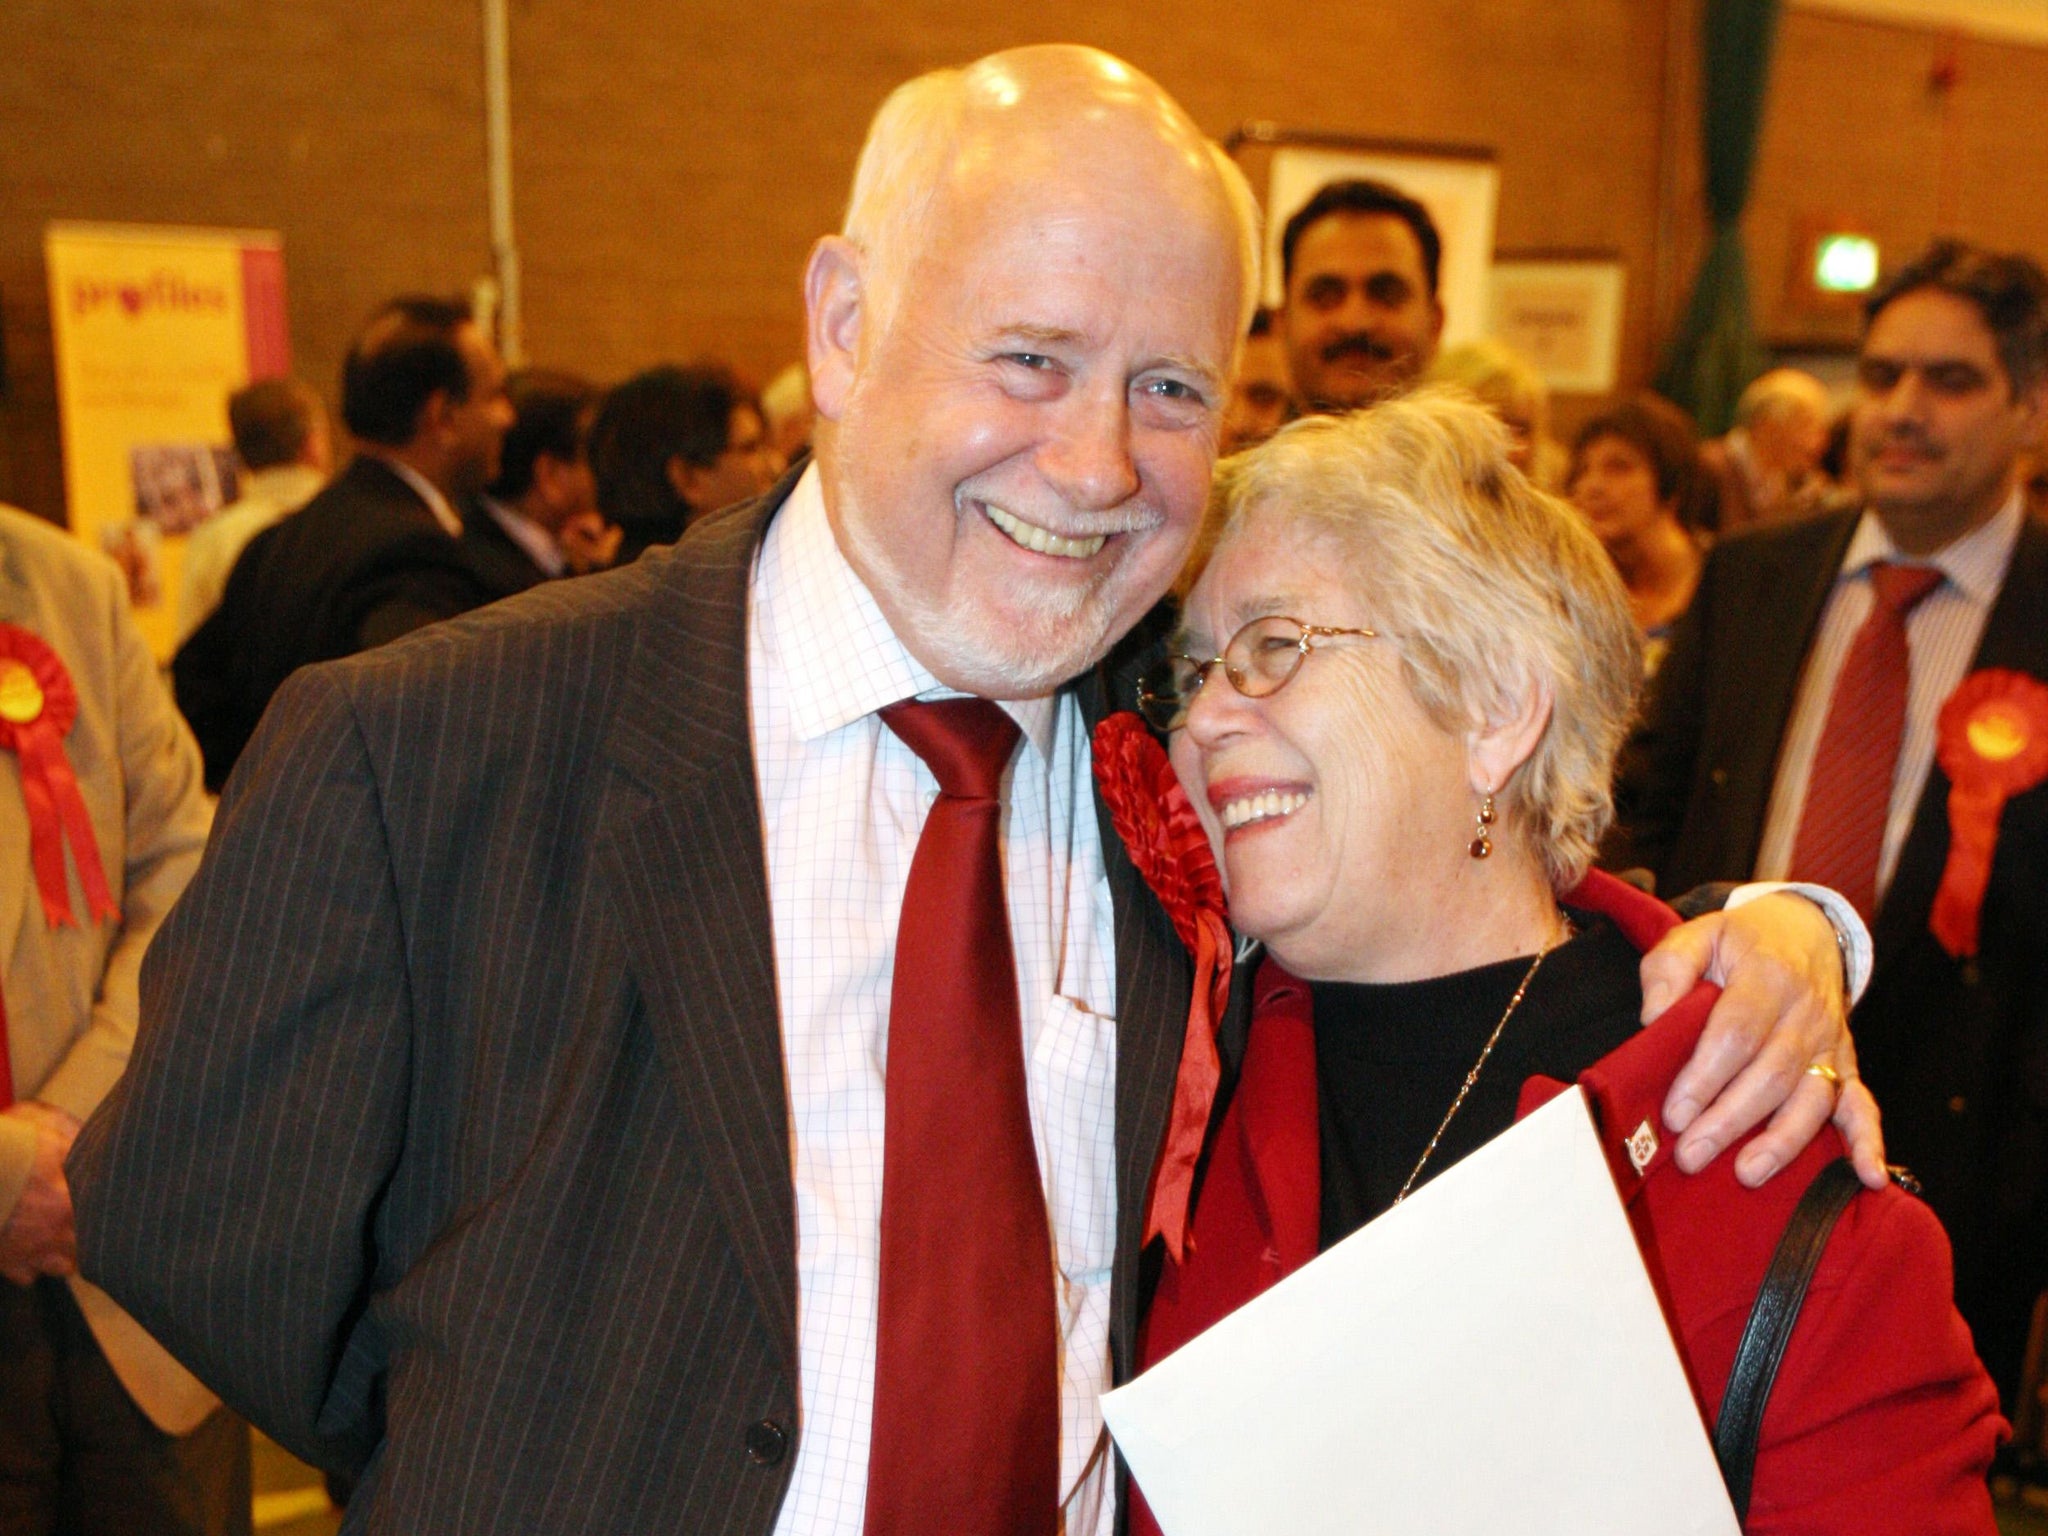 Kelvin Hopkins has served as MP for Luton North since 1997